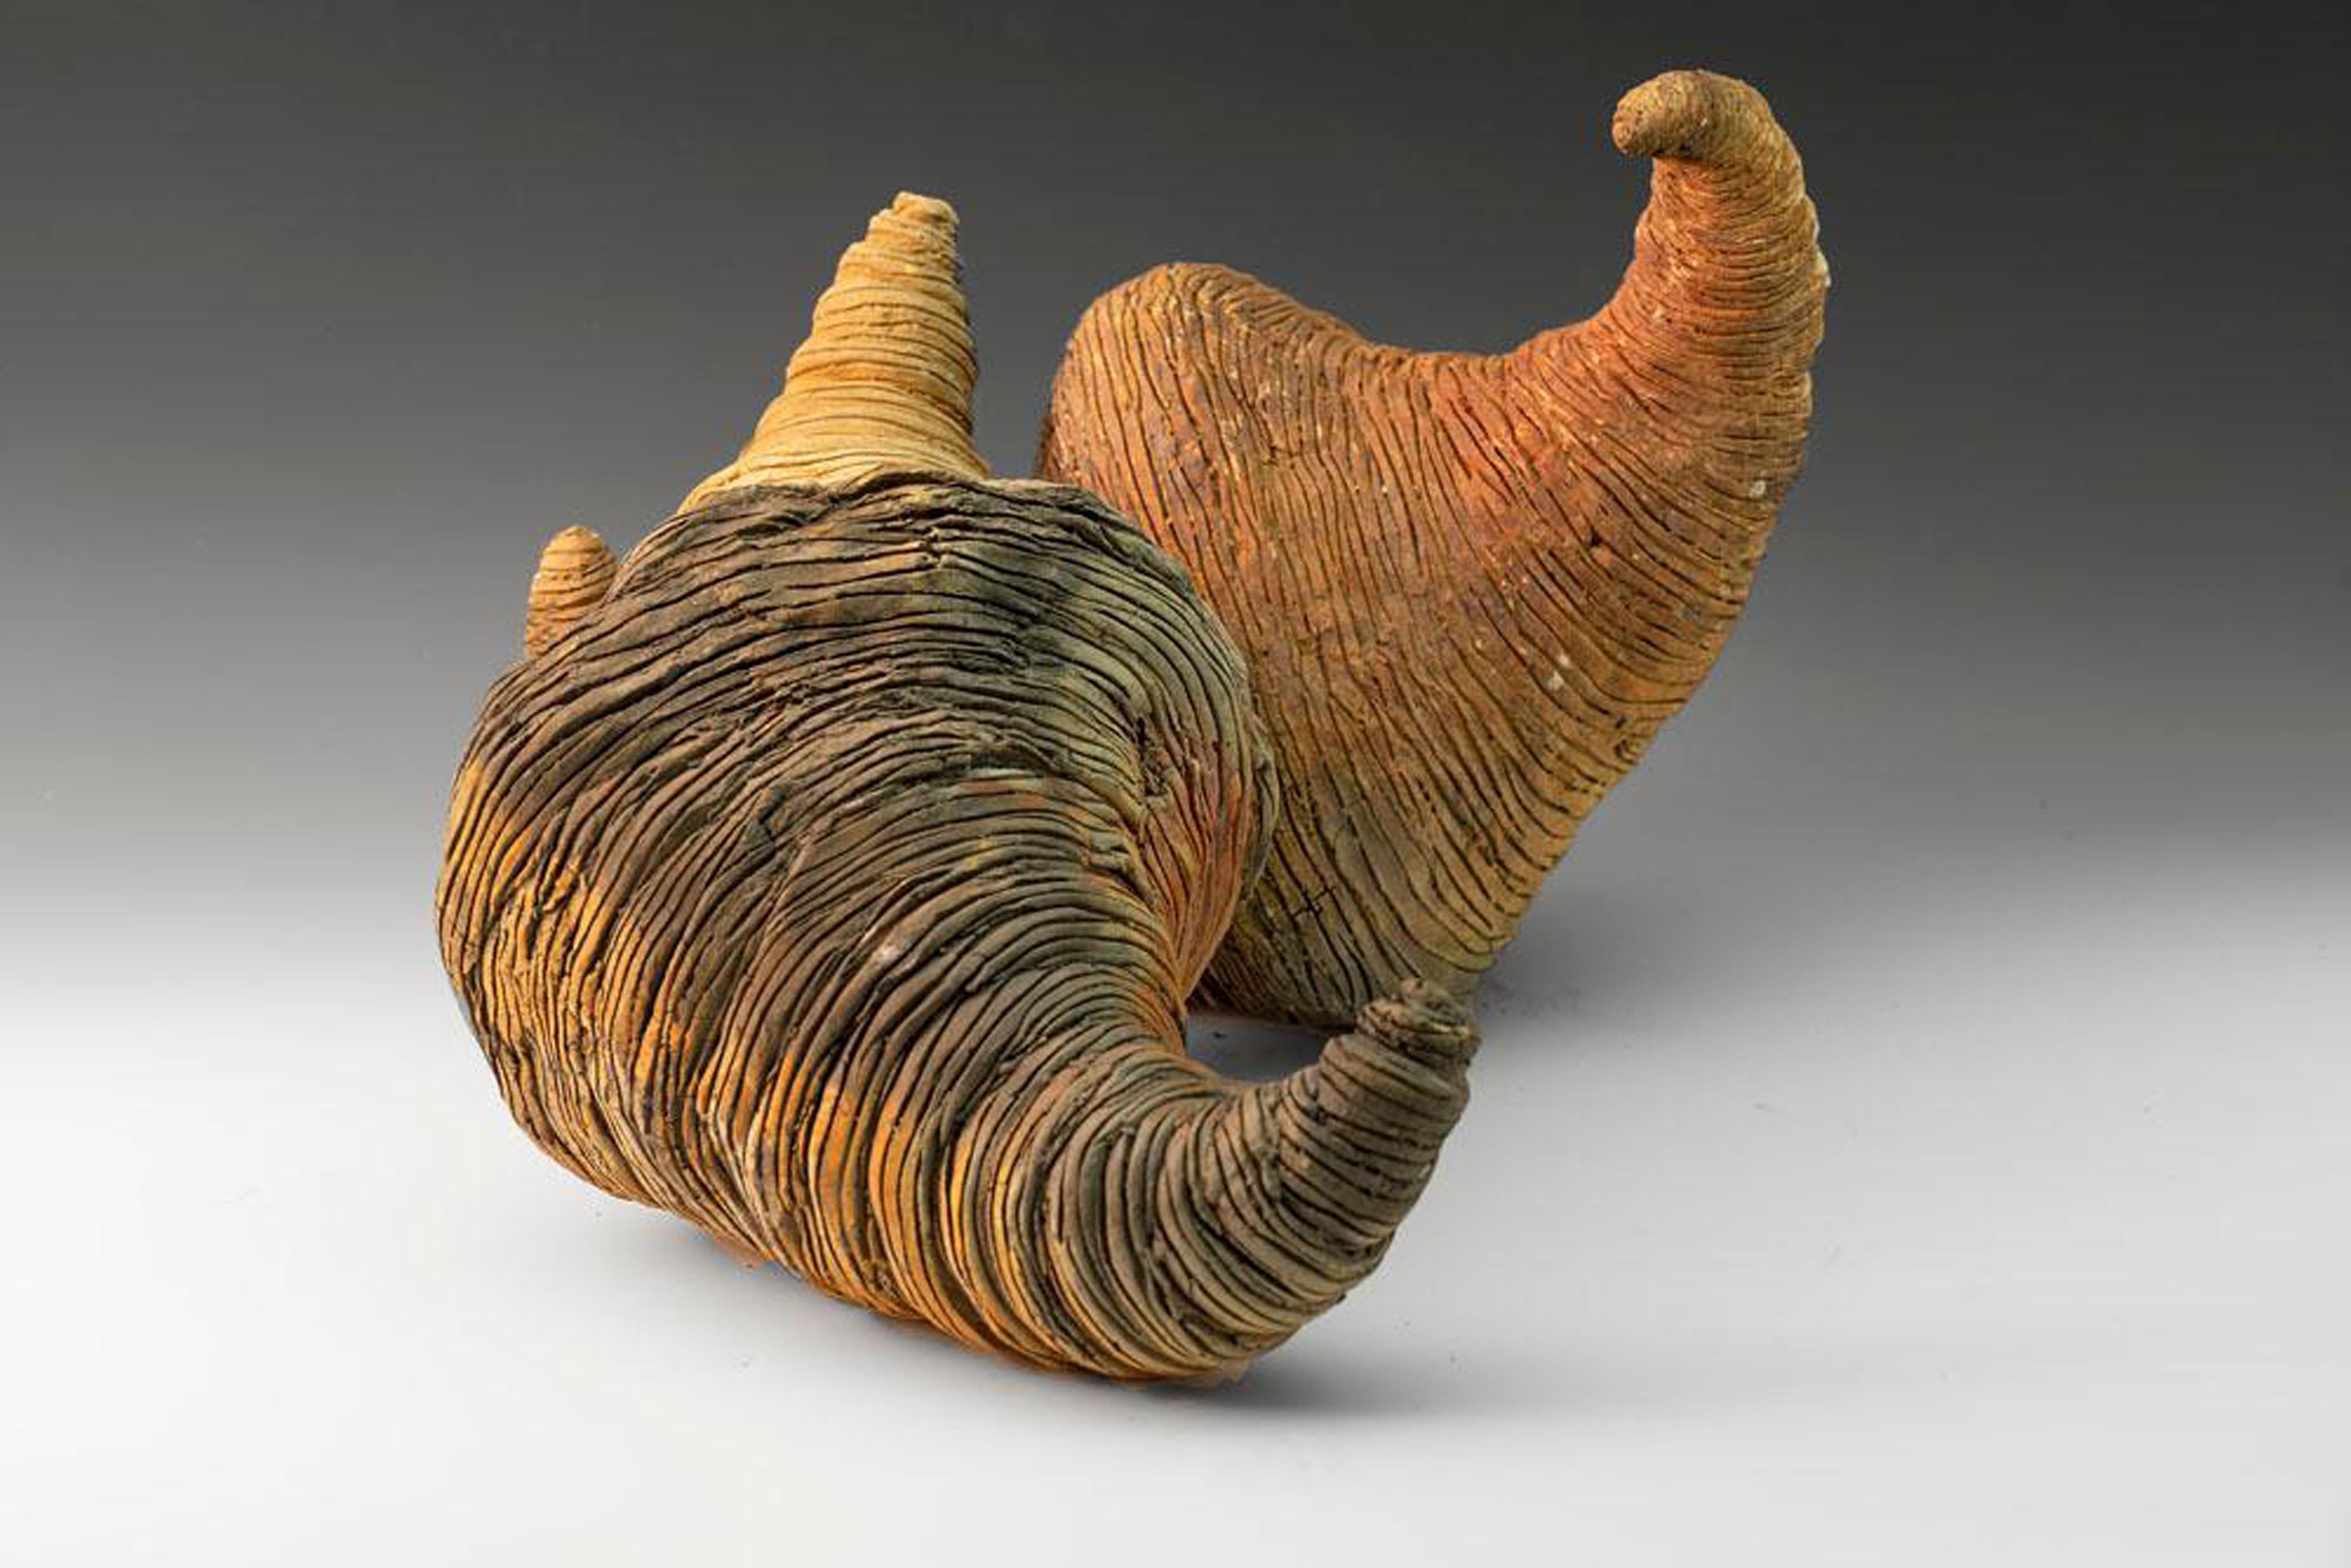 Allan Drossman Abstract Sculpture - "The Kiss",  textured ceramic in gold and reddish browns